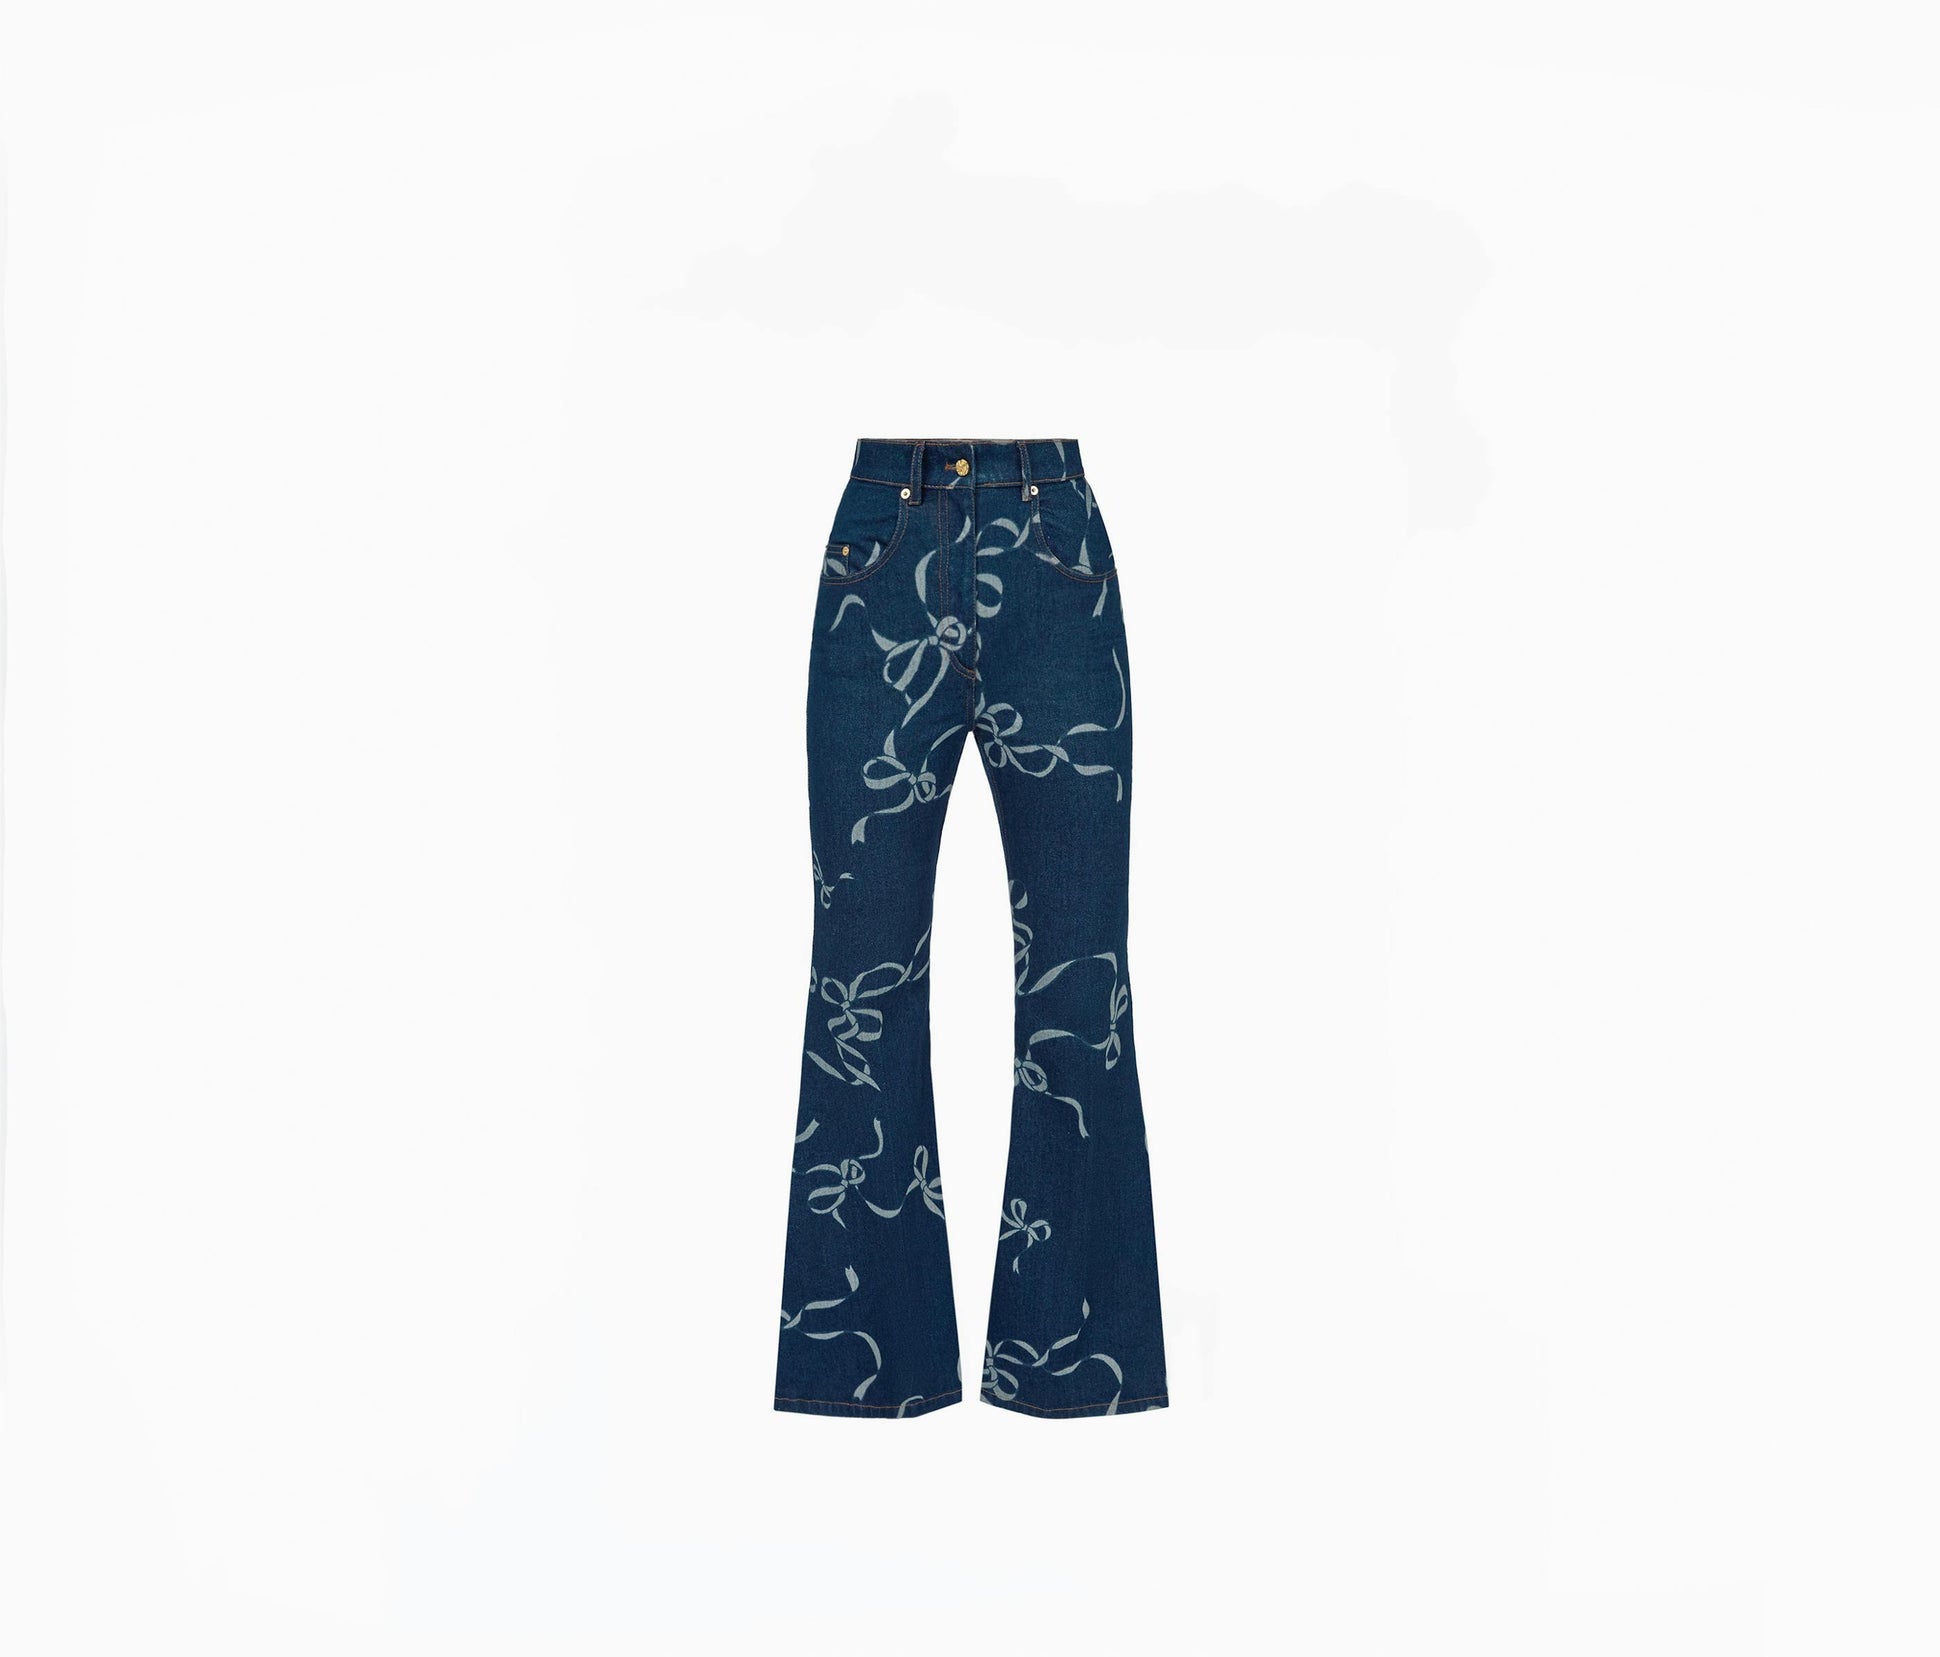 BOW-PRINT EXAGGERATED FLARE JEANS 36